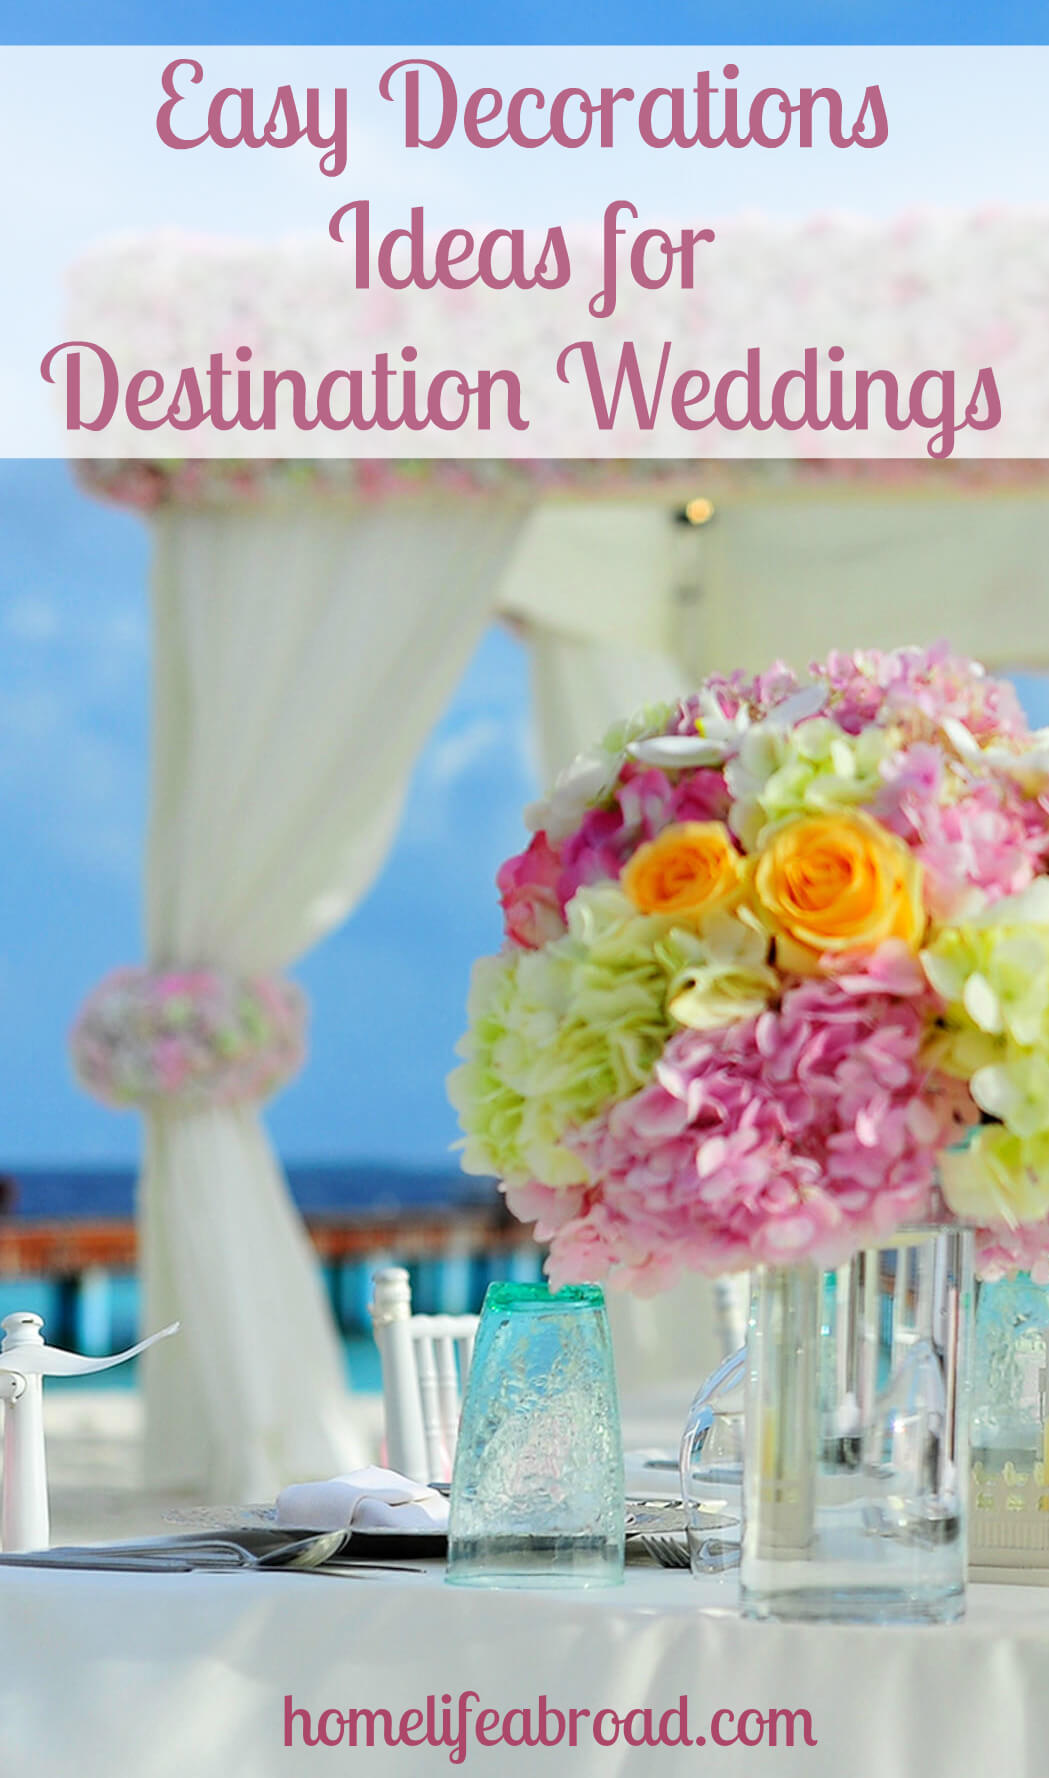 Destination weddings are all the rage for expats. To help inspire you, here are a few beautiful and easy decoration ideas to celebrate your wedding day! #wedding #expatlife #weddingdecor #weddingdecorations #destinationwedding